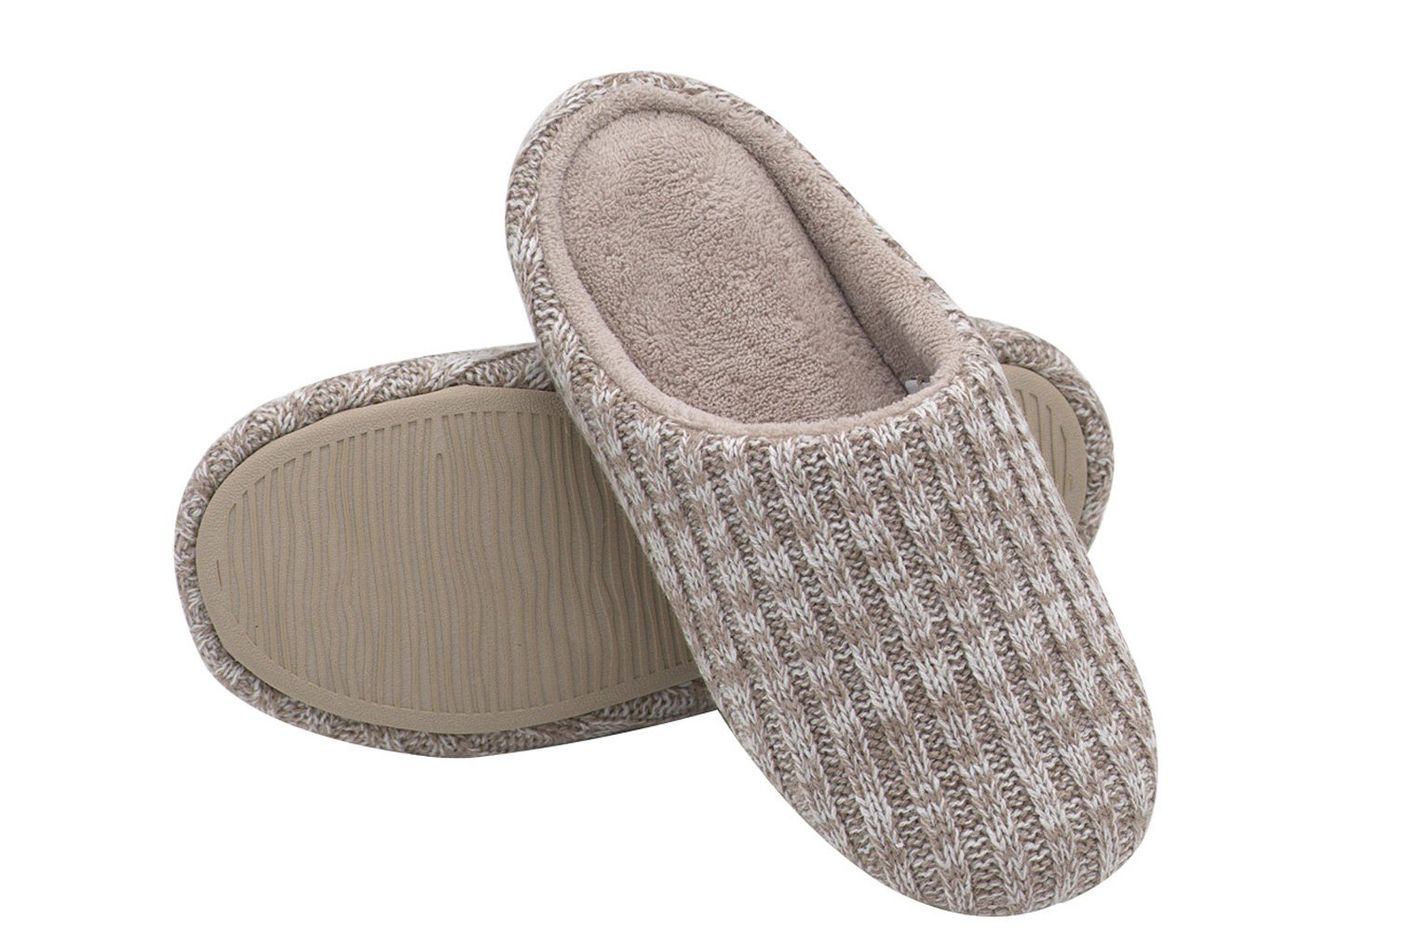 04 Cashmere Slippers.w710.h473.2x 